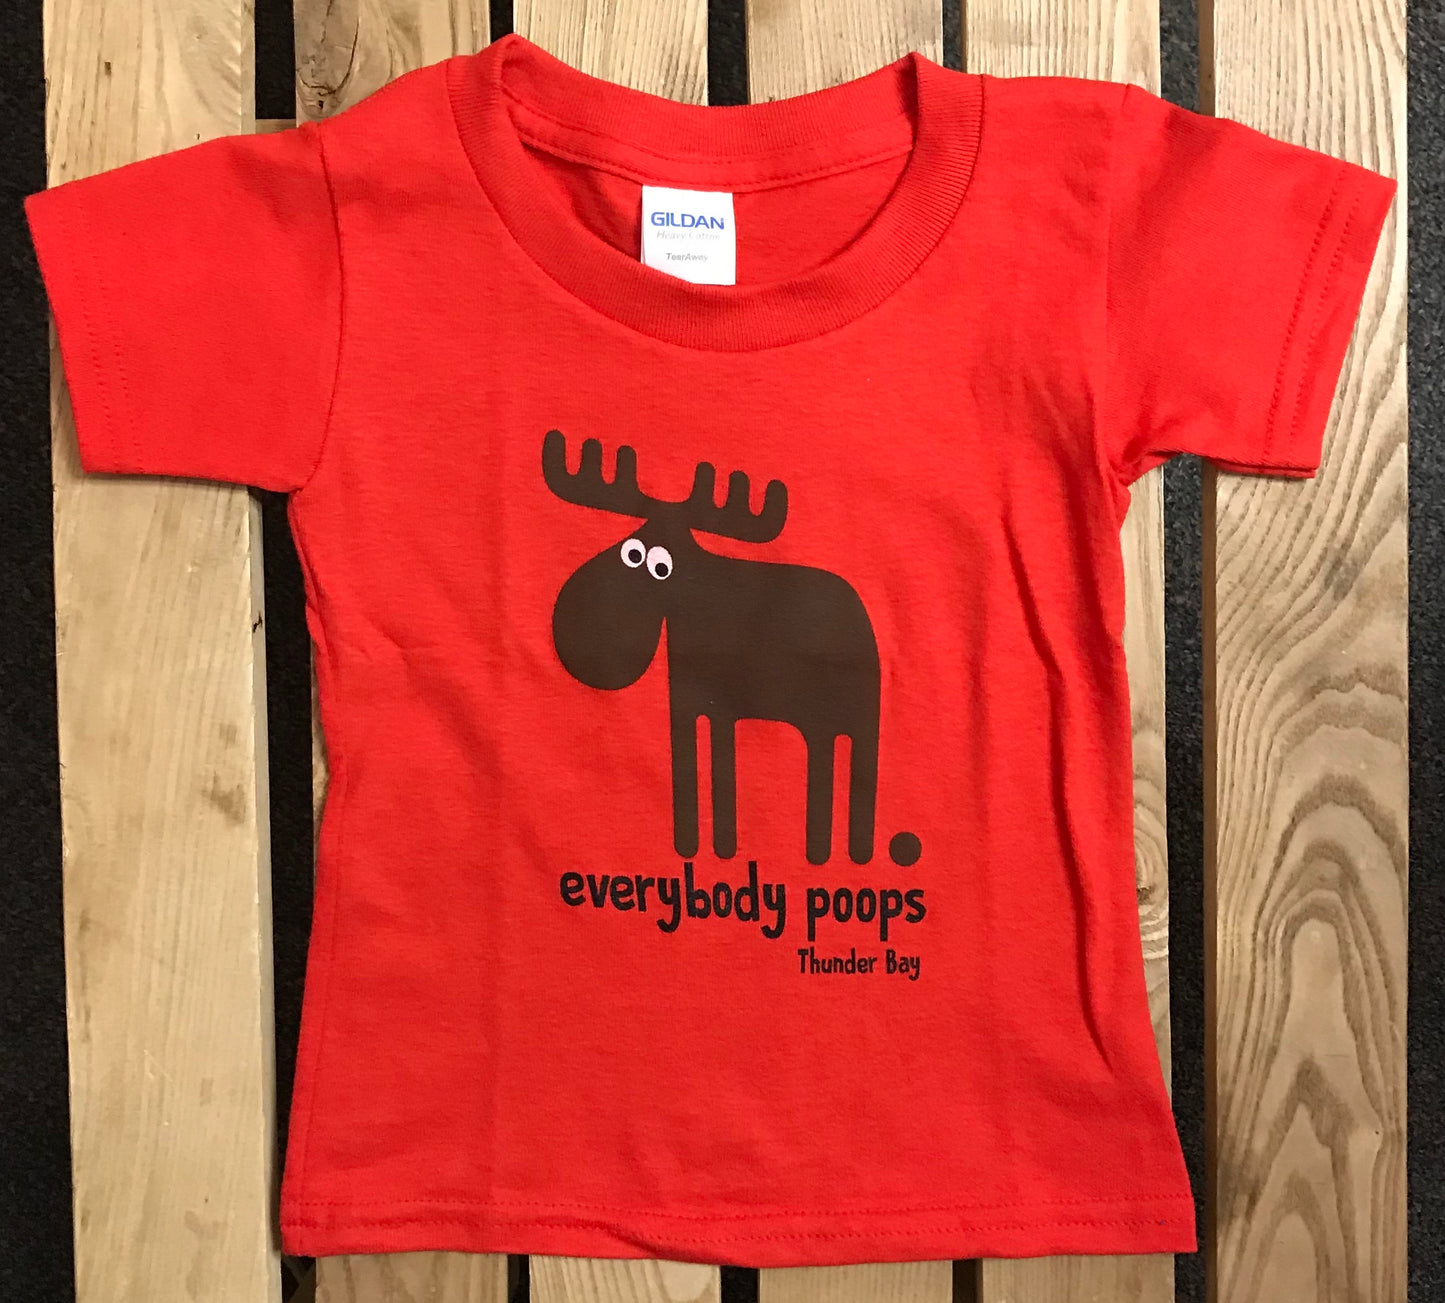 Kid's T-shirt - Thunder Bay, "Everybody Poops" - Red